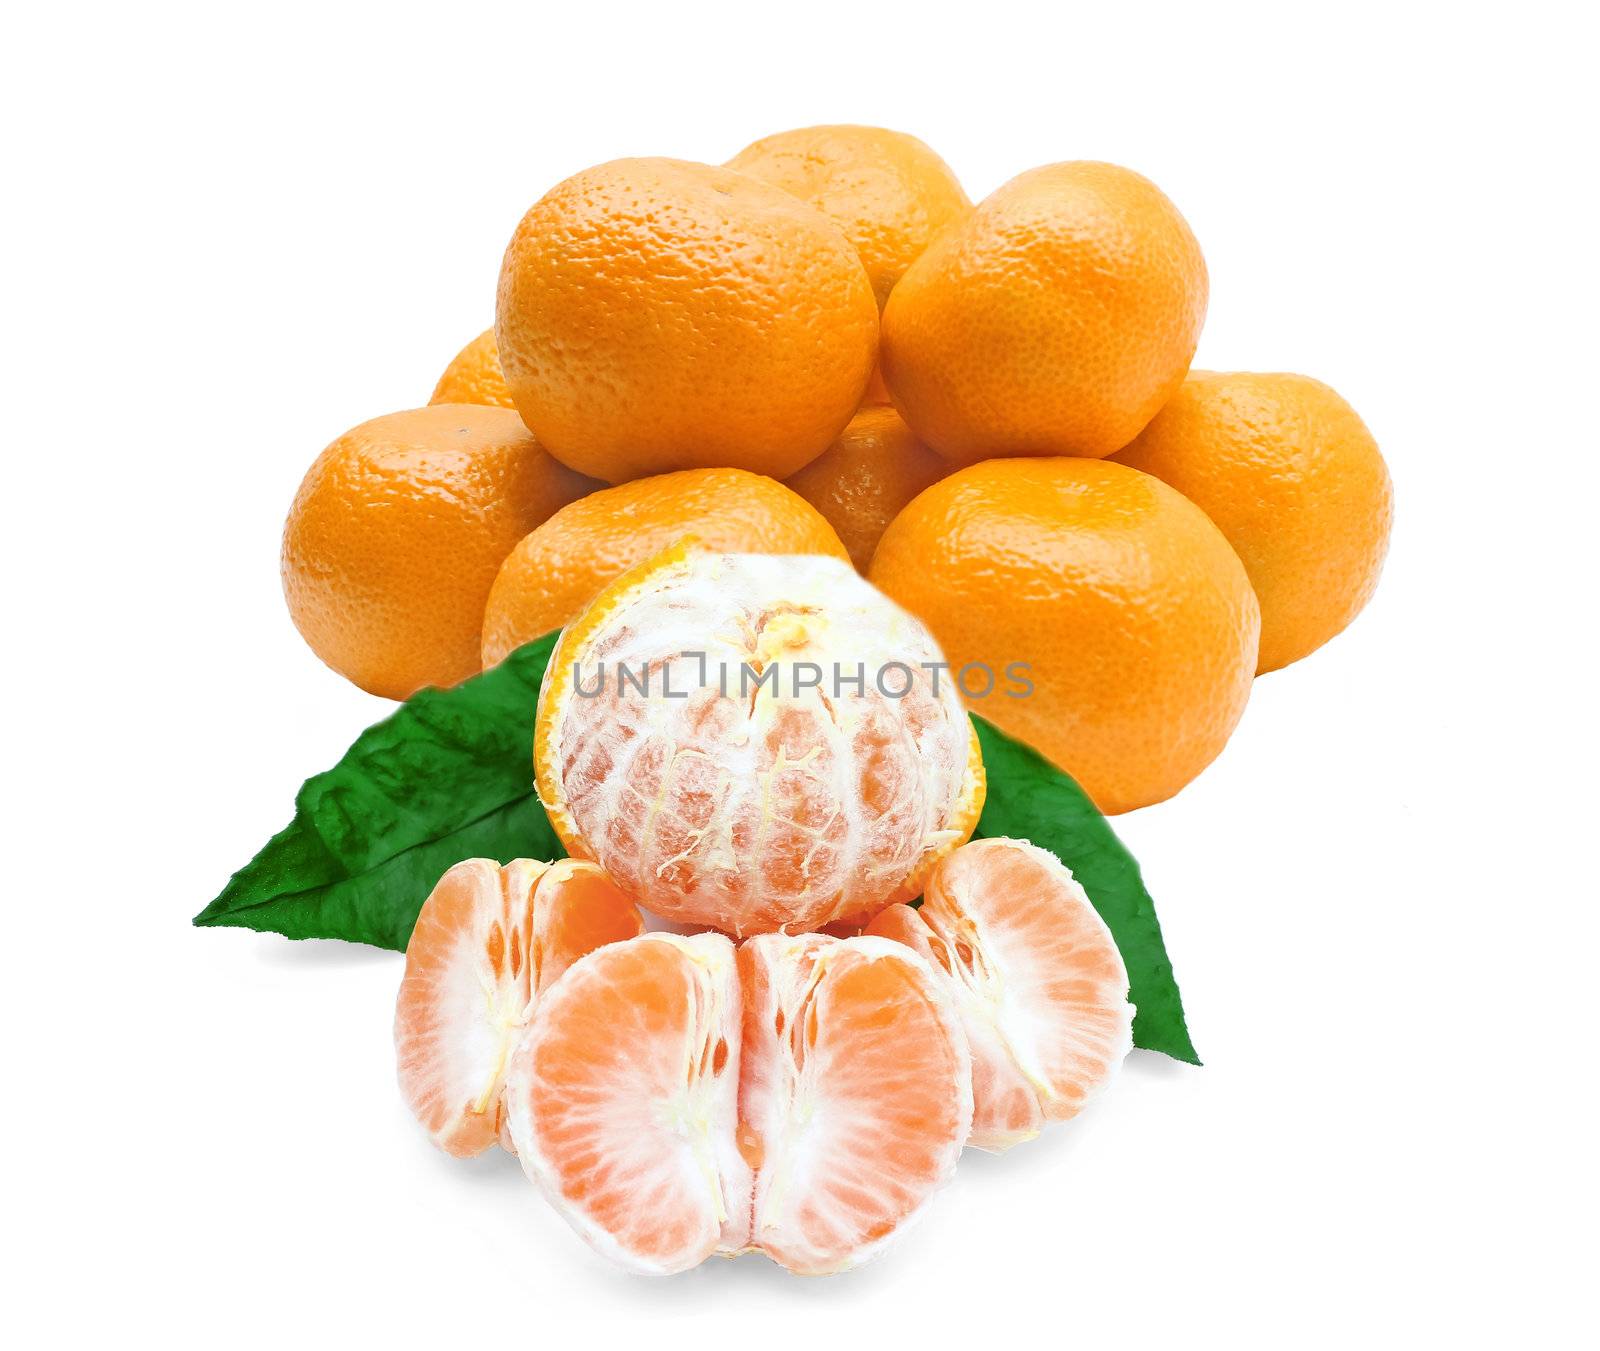 Whole and peeled tangerines on a white background by NickNick